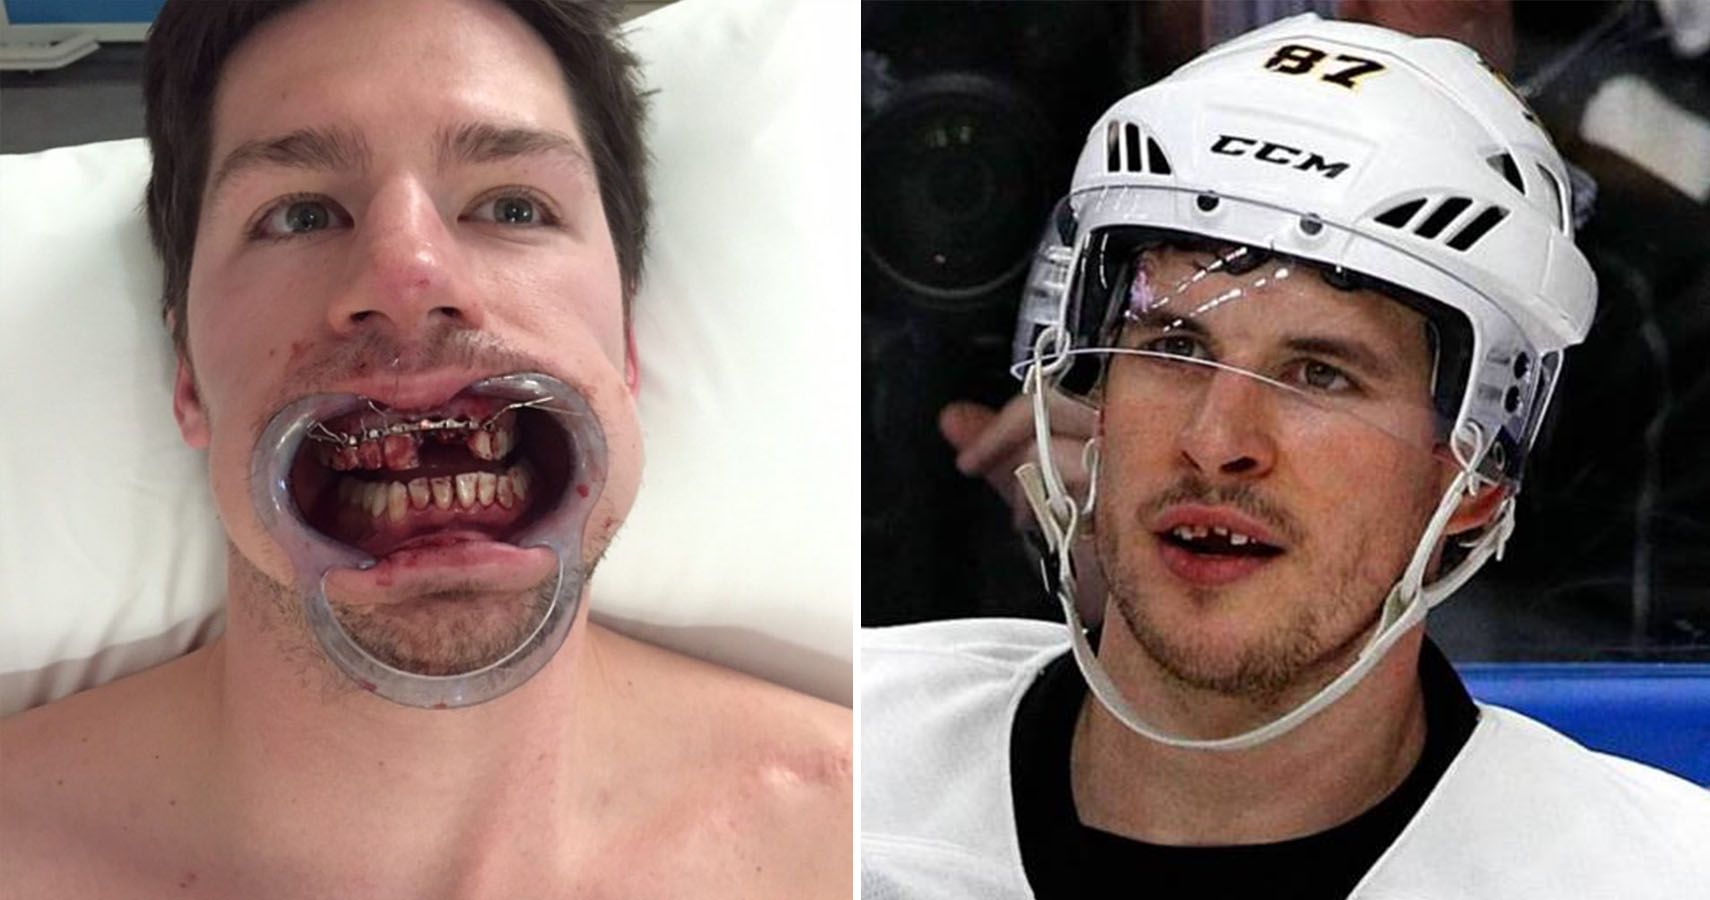 Hockey player's teeth come flying out after he takes is struck in